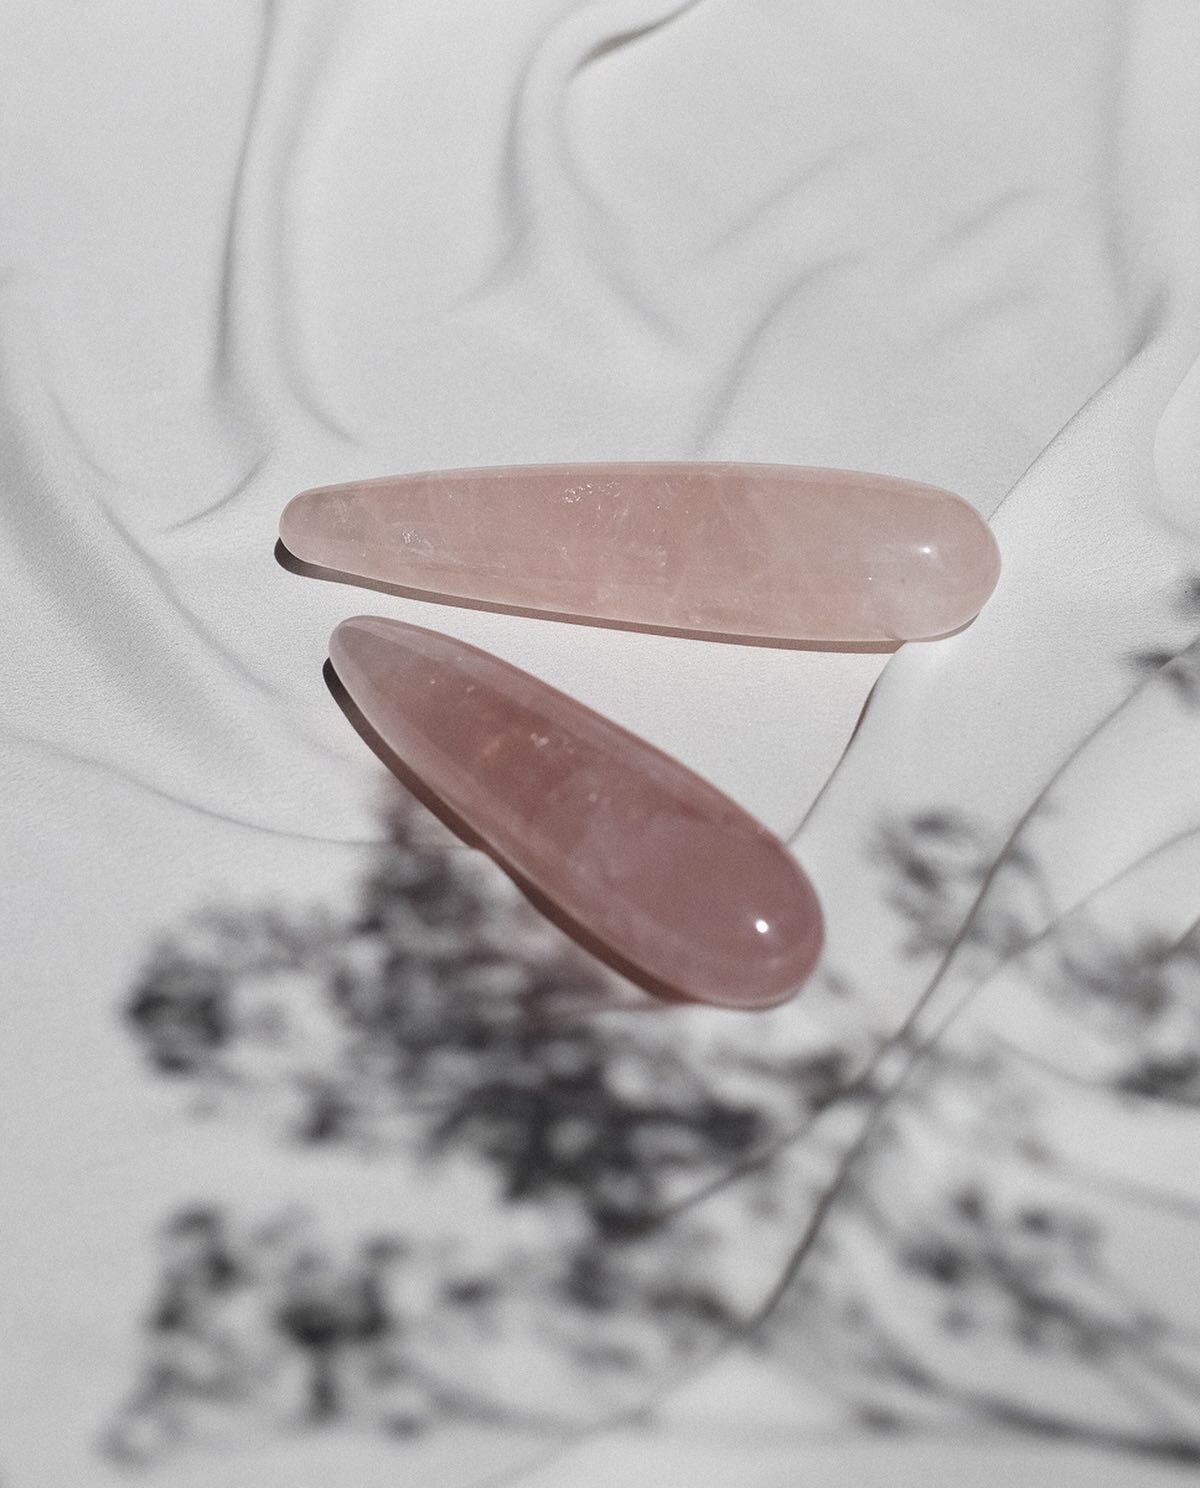 Curious how a Yoni Wand is produced?

Learn about the process from start to finish in our journal on lucidmoons.com. 

Simple, natural and free of chemicals. &bull; #lucidmoons 

#crystalwand #yonimassage #cervix #rosequartzcrystal #tantricmassage #a